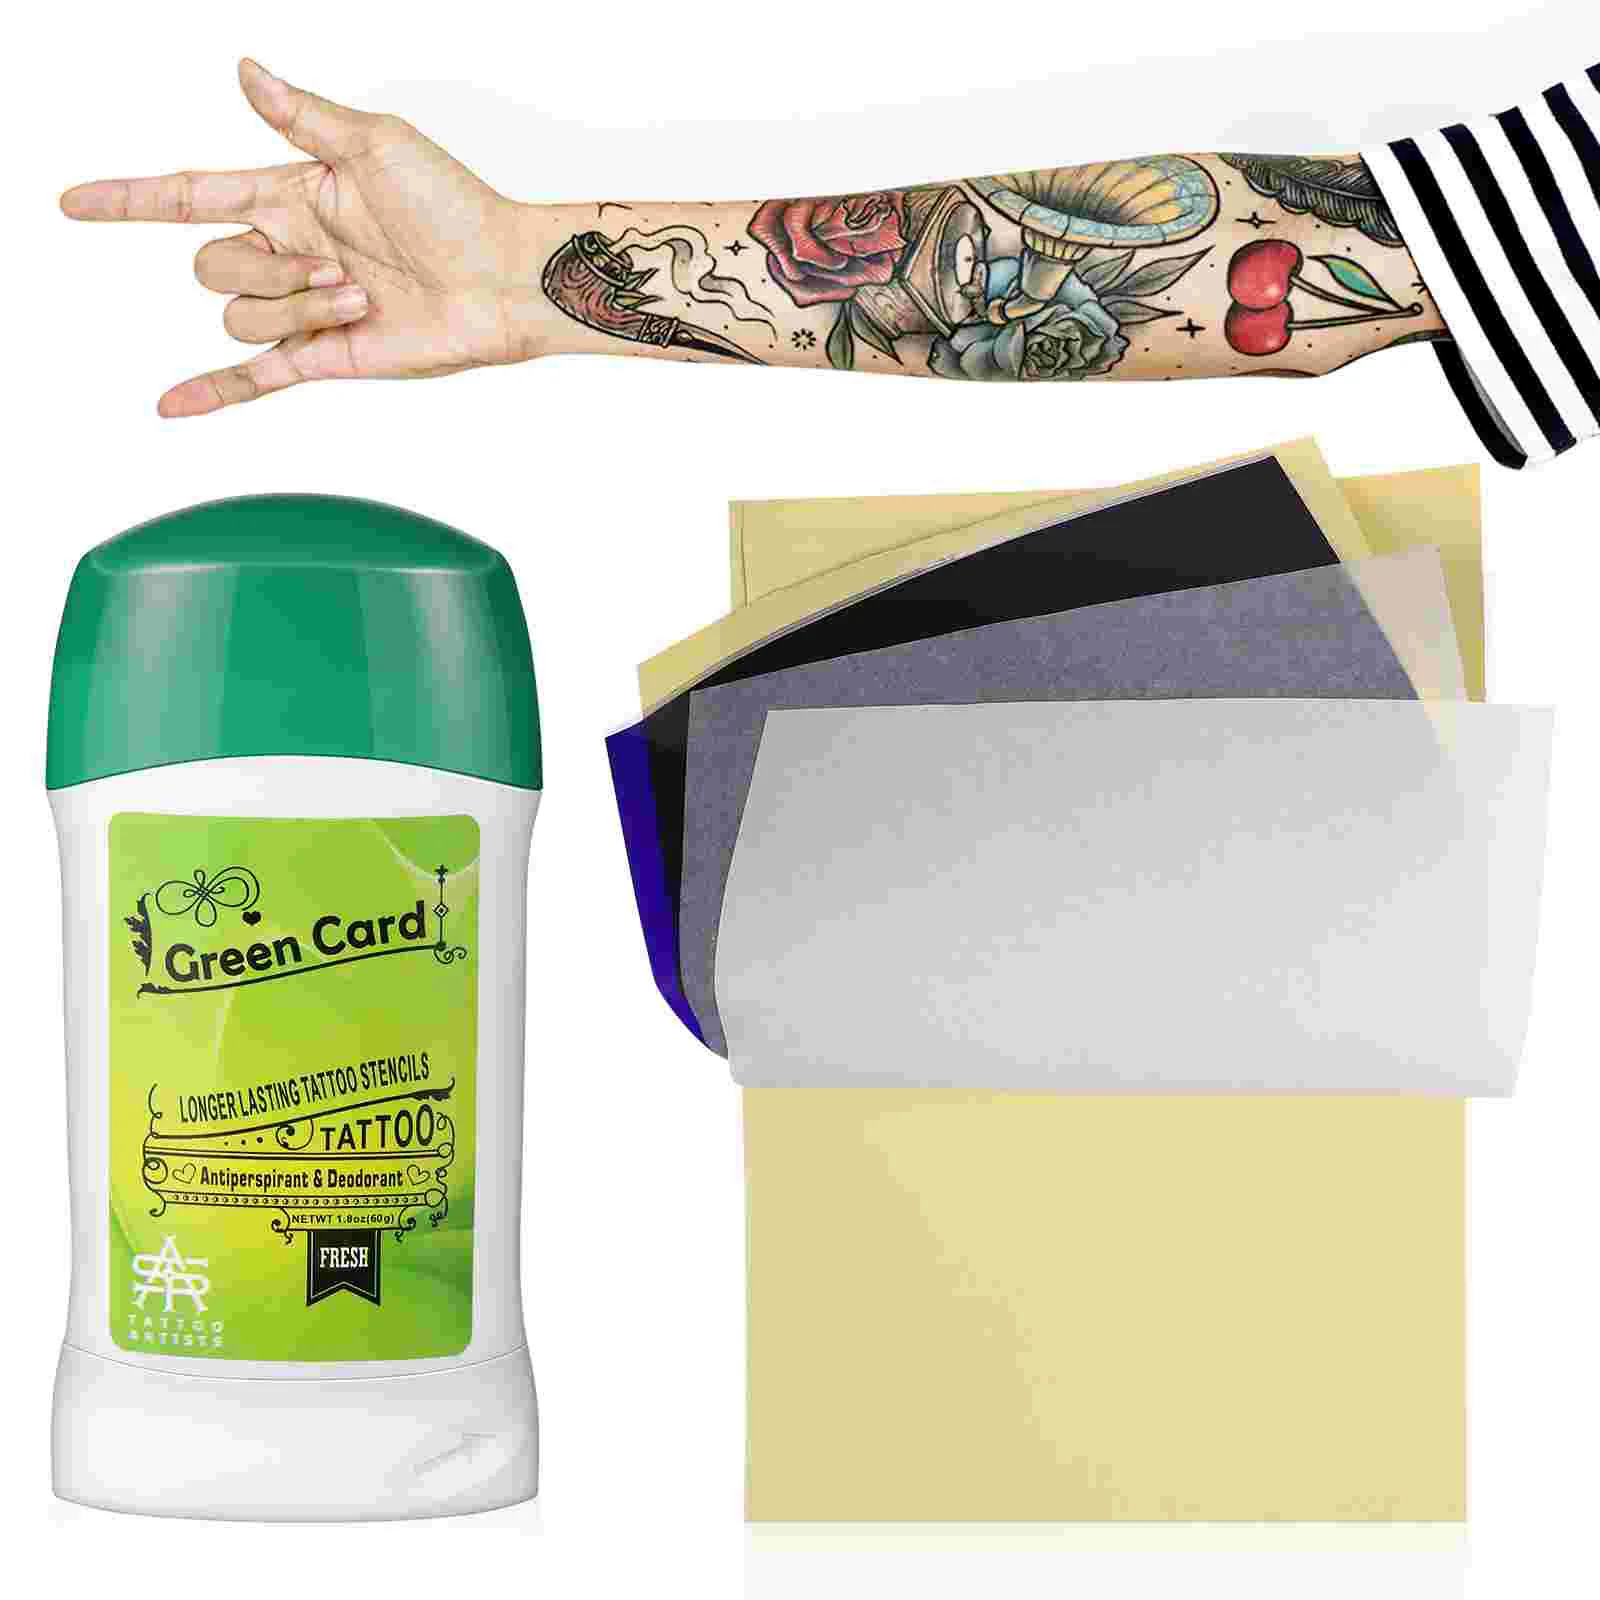 Tattoo Transfer Kit with Safe Ingredients and Matching Paper for Realistic Tattoos